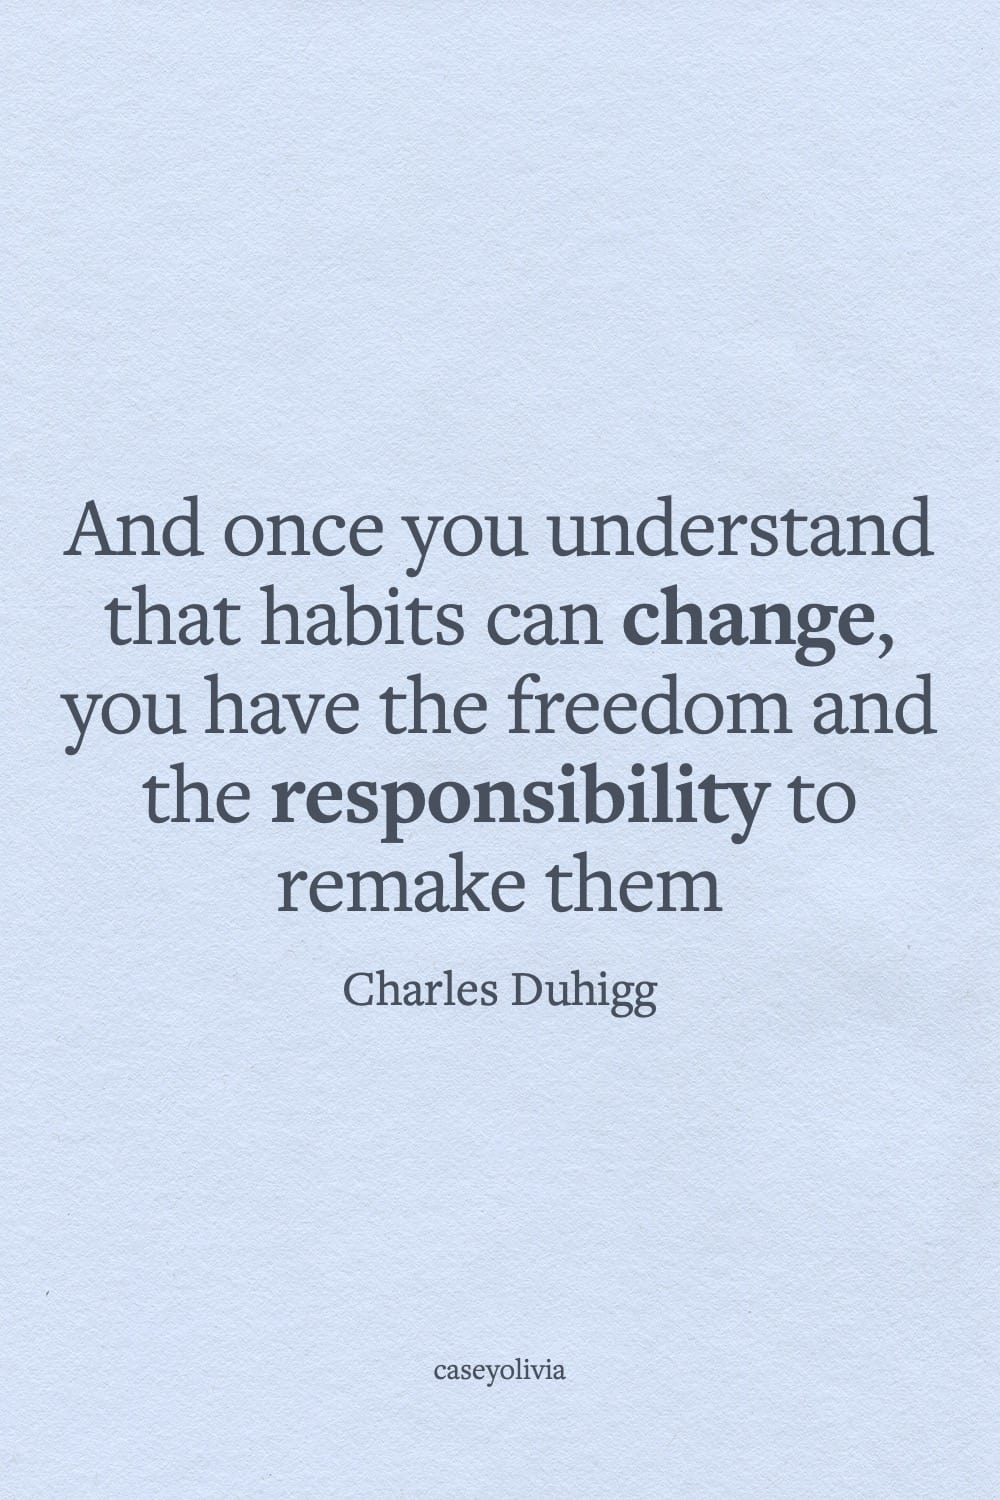 you can change your habits inspiring words charles duhigg